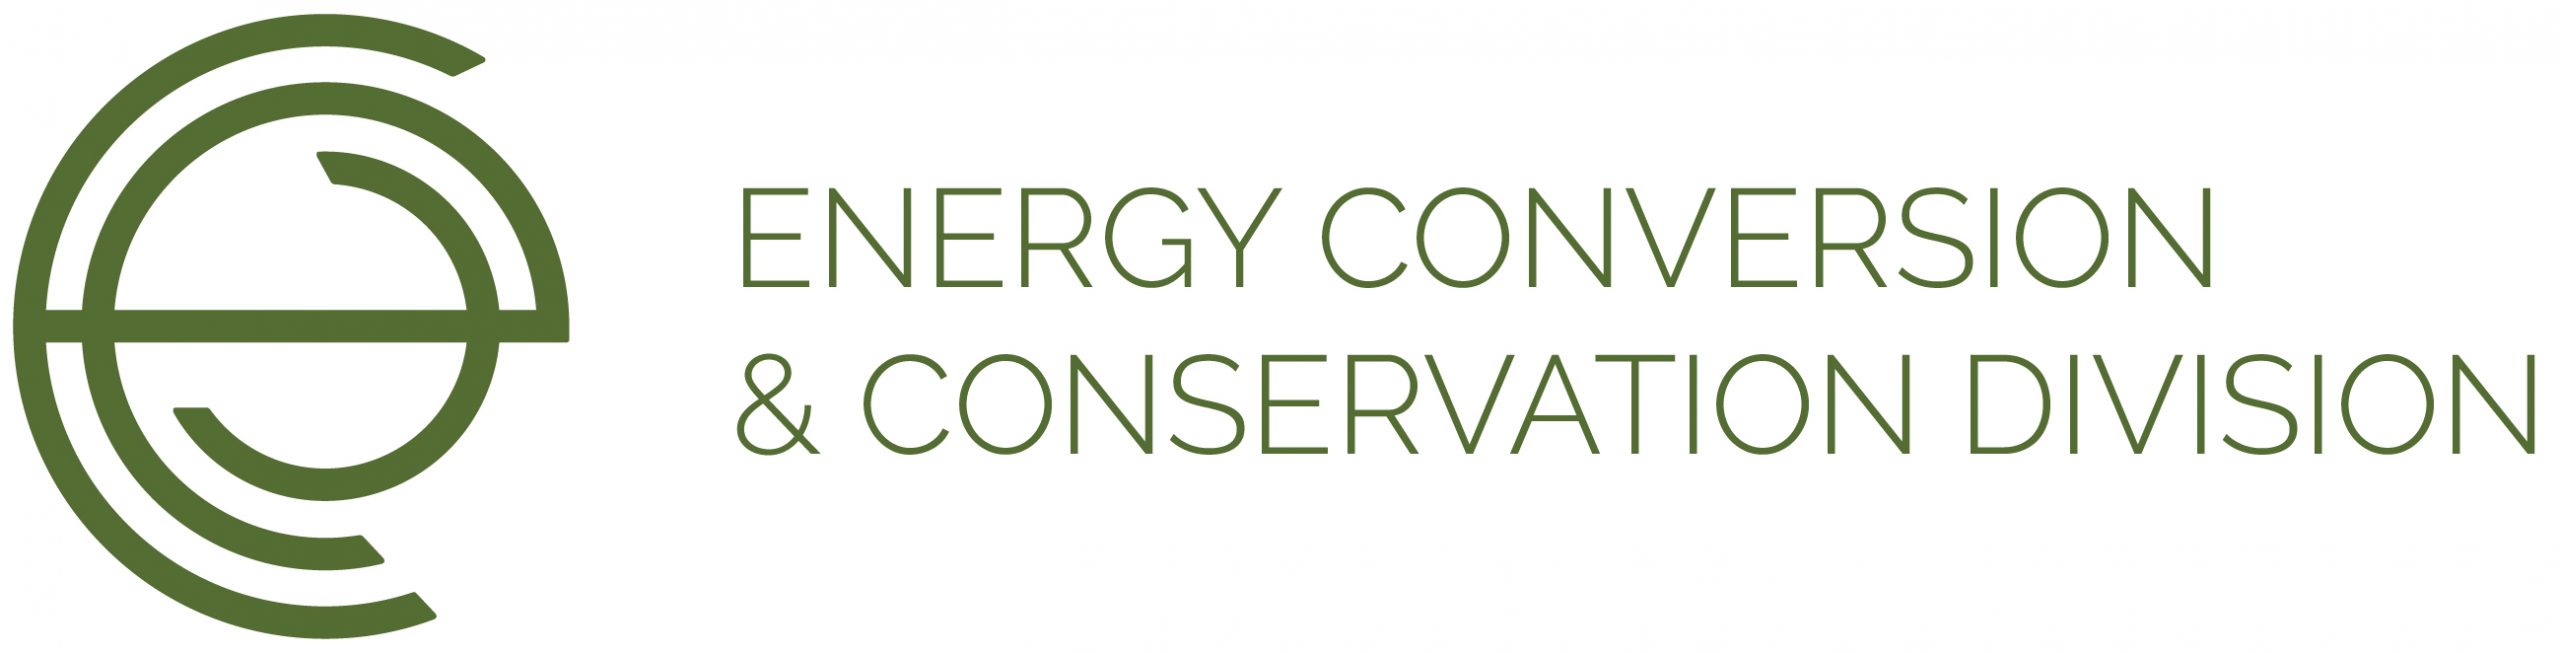 ASEE Energy Conversion & Conservation Division